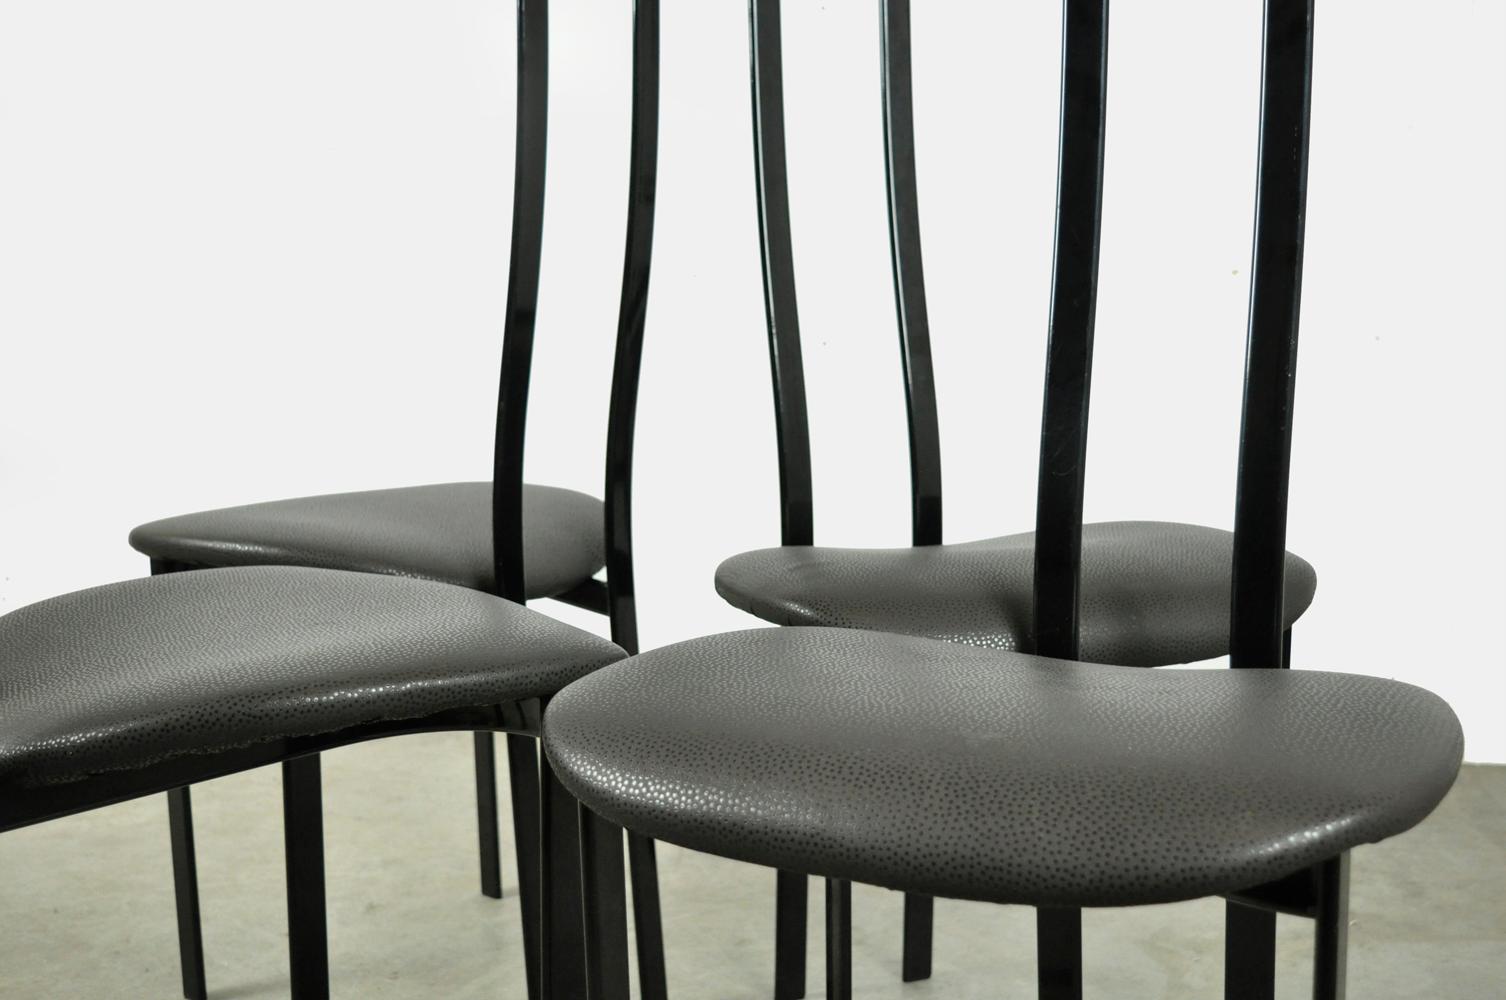 Set of 4 Italian Postmodern dining chairs by Maurizio Cattelan, 1980s For Sale 3